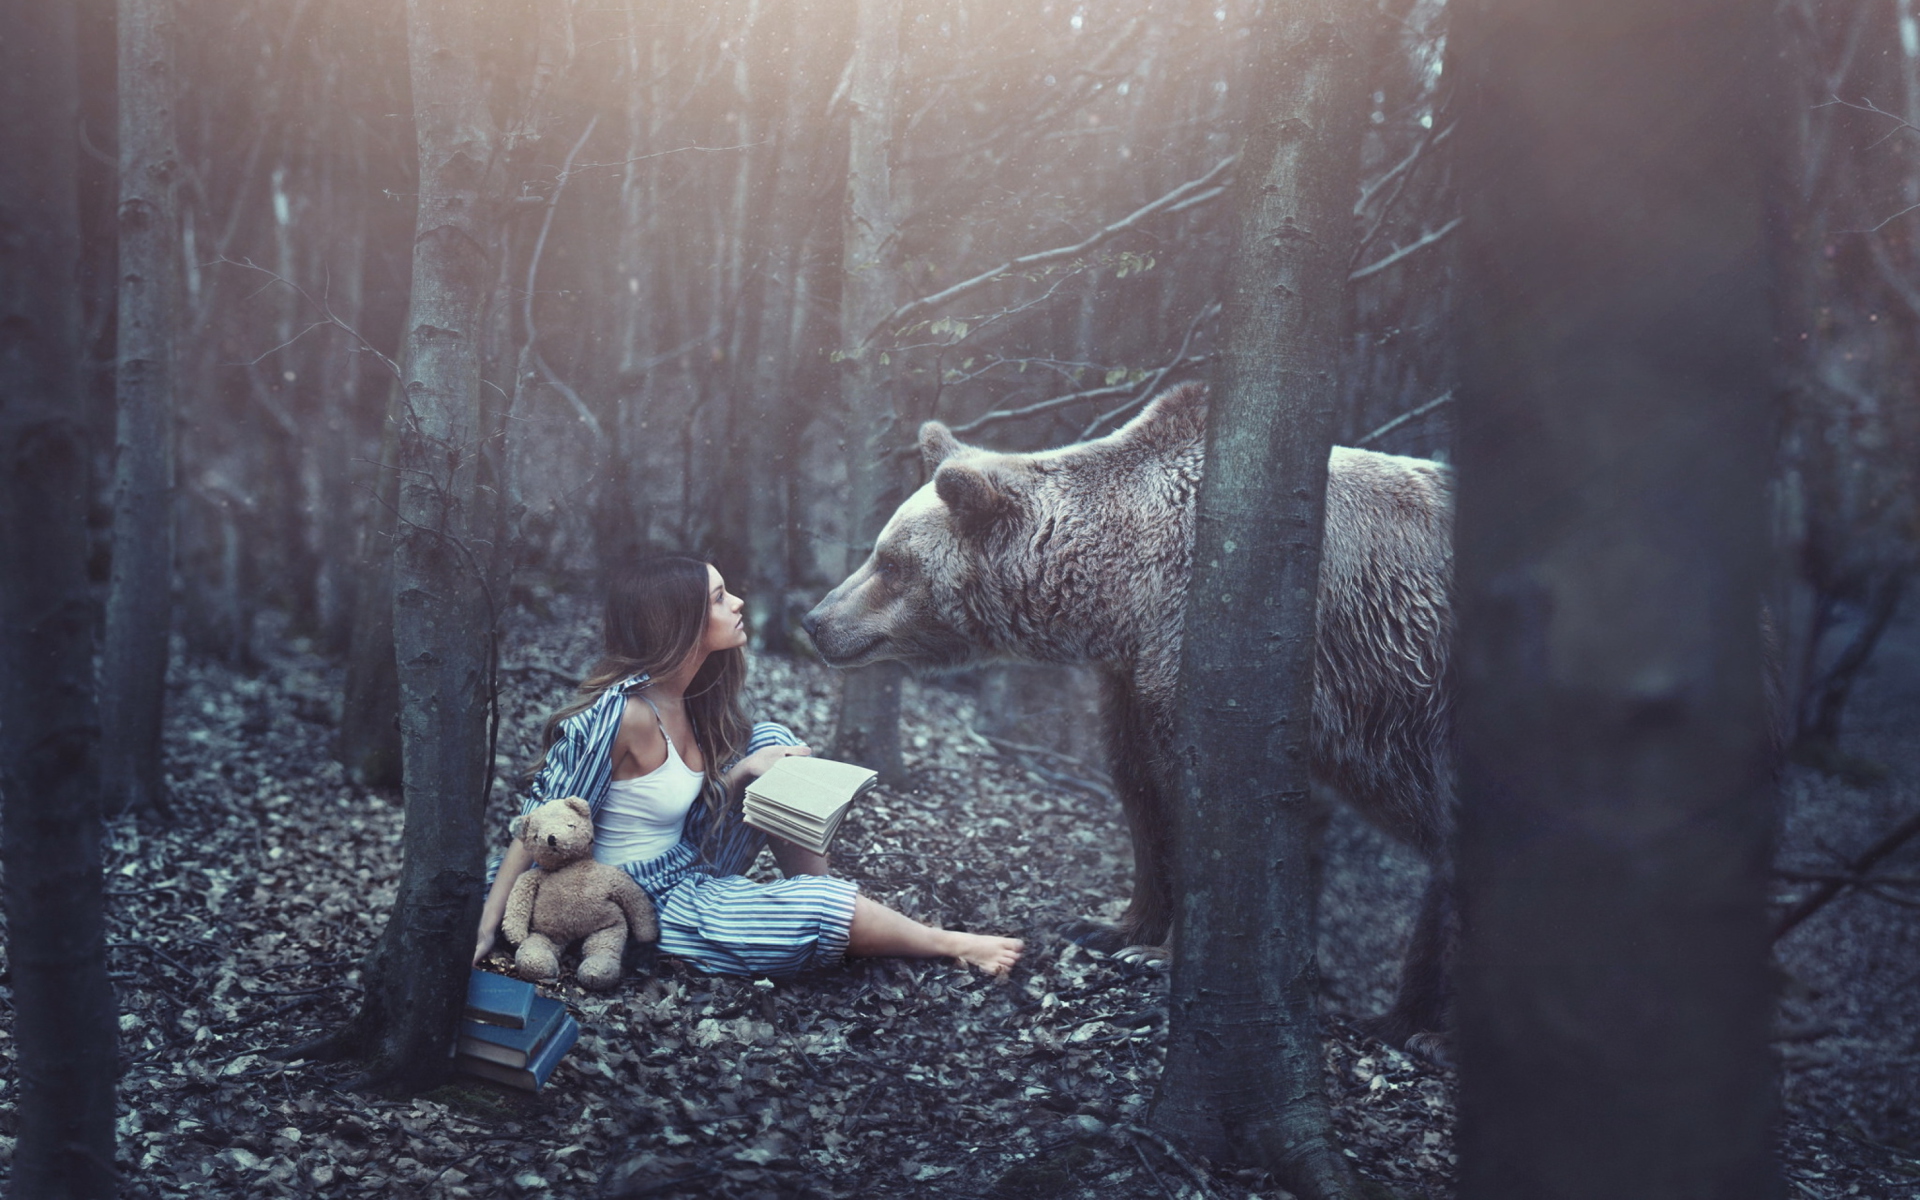 Girl And Two Bears In Forest By Rosie Hardy Photographer wallpaper 1920x1200